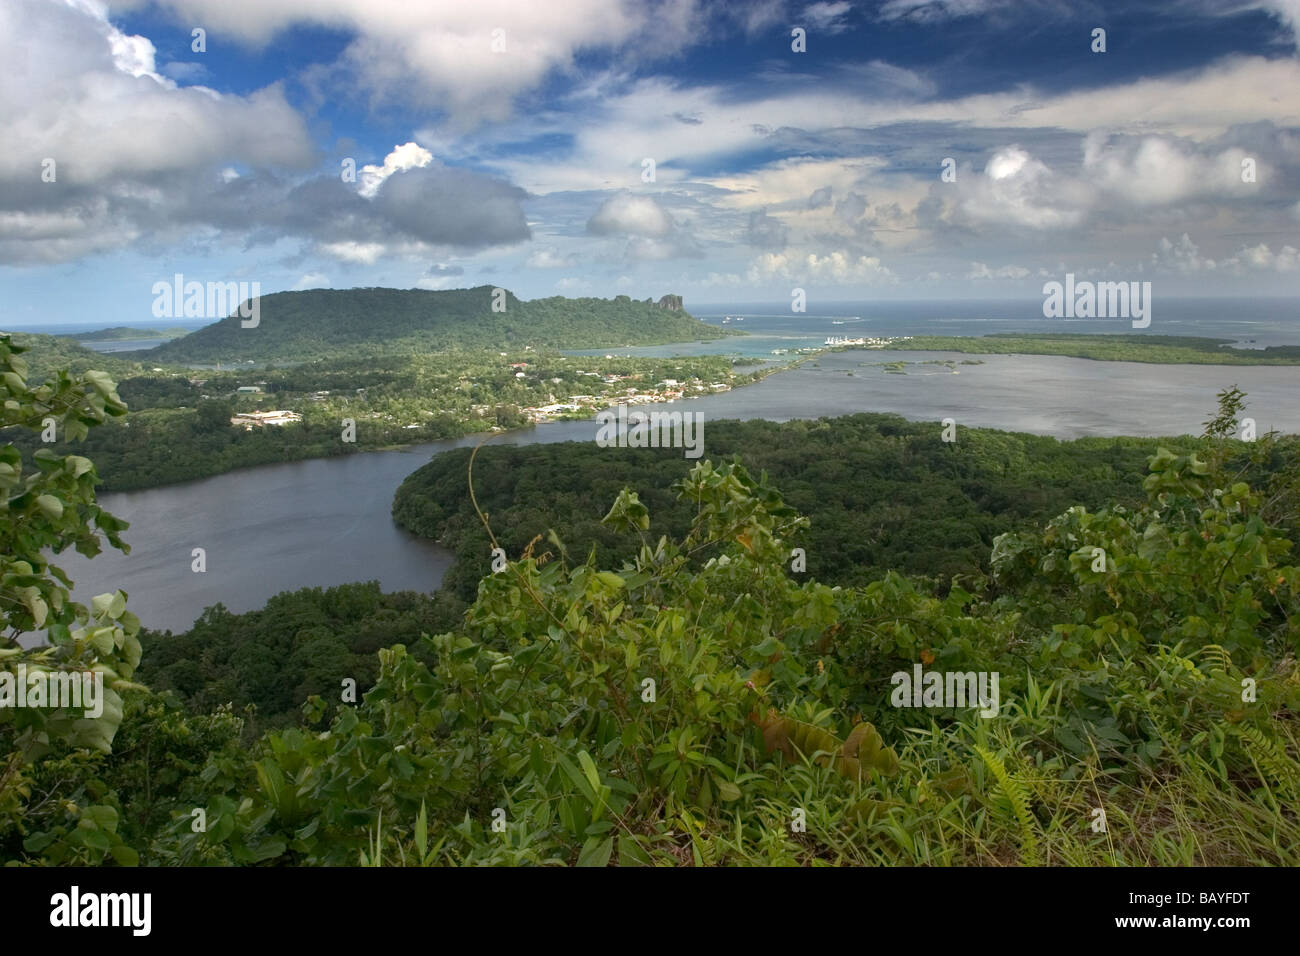 Kolonia and Sokehs Island as seen from Pohnlehr mountain, Pohnpei Island, Federated States of Micronesia. Stock Photo